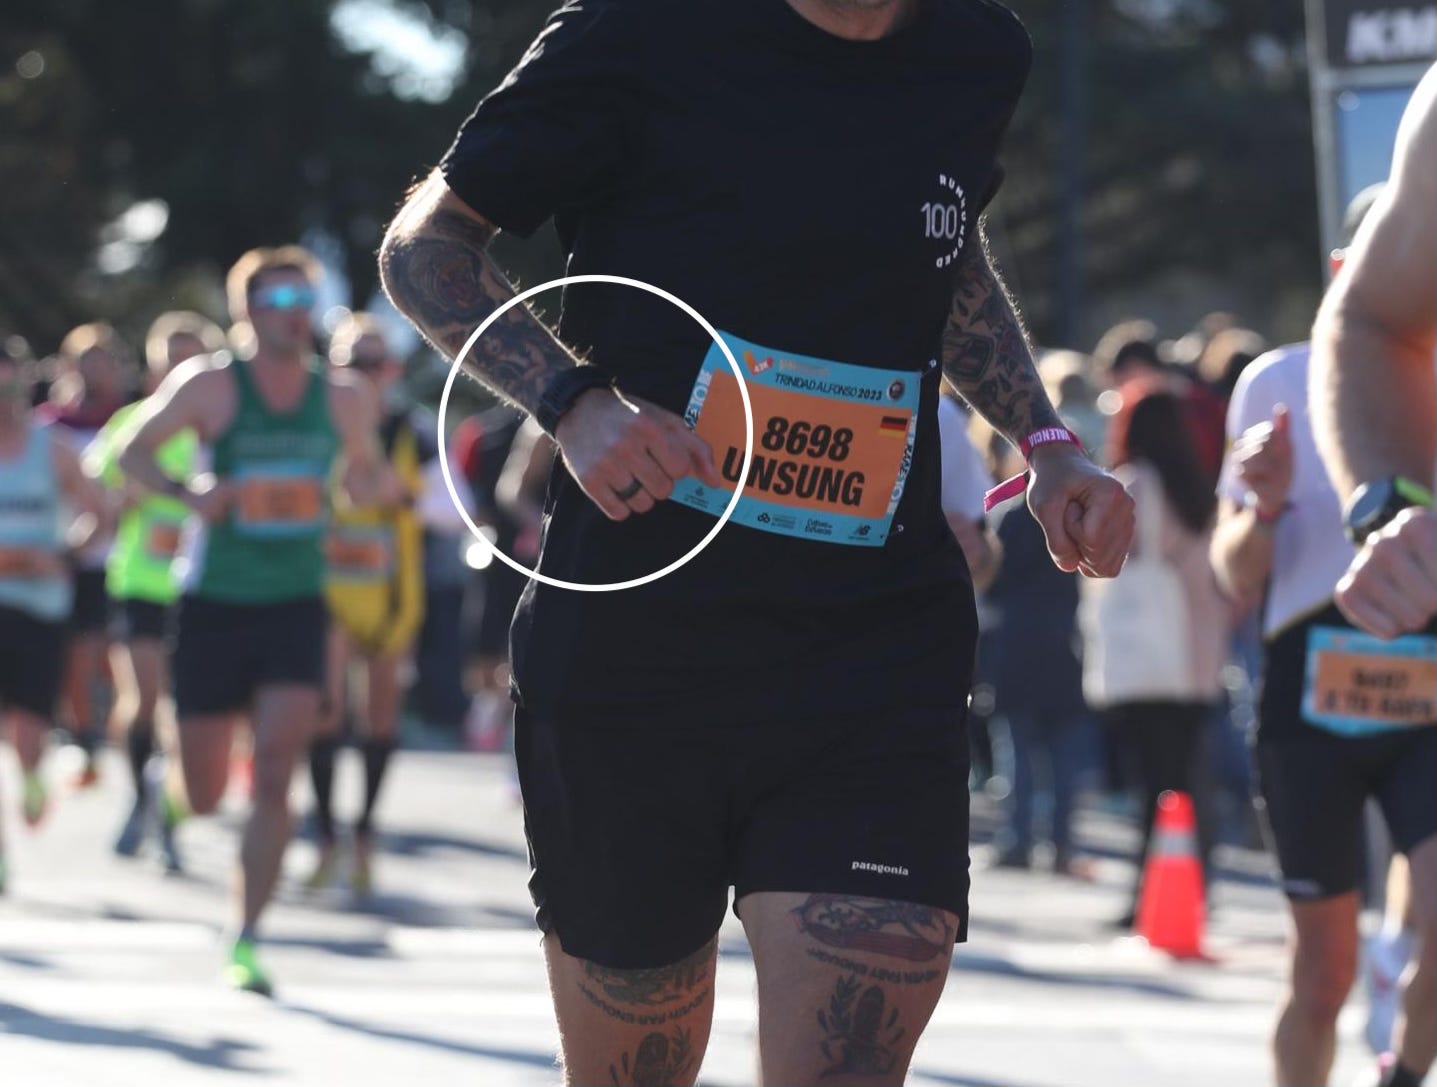 The author racing the Valencia marathon with his watch turned to the inside of his wrist